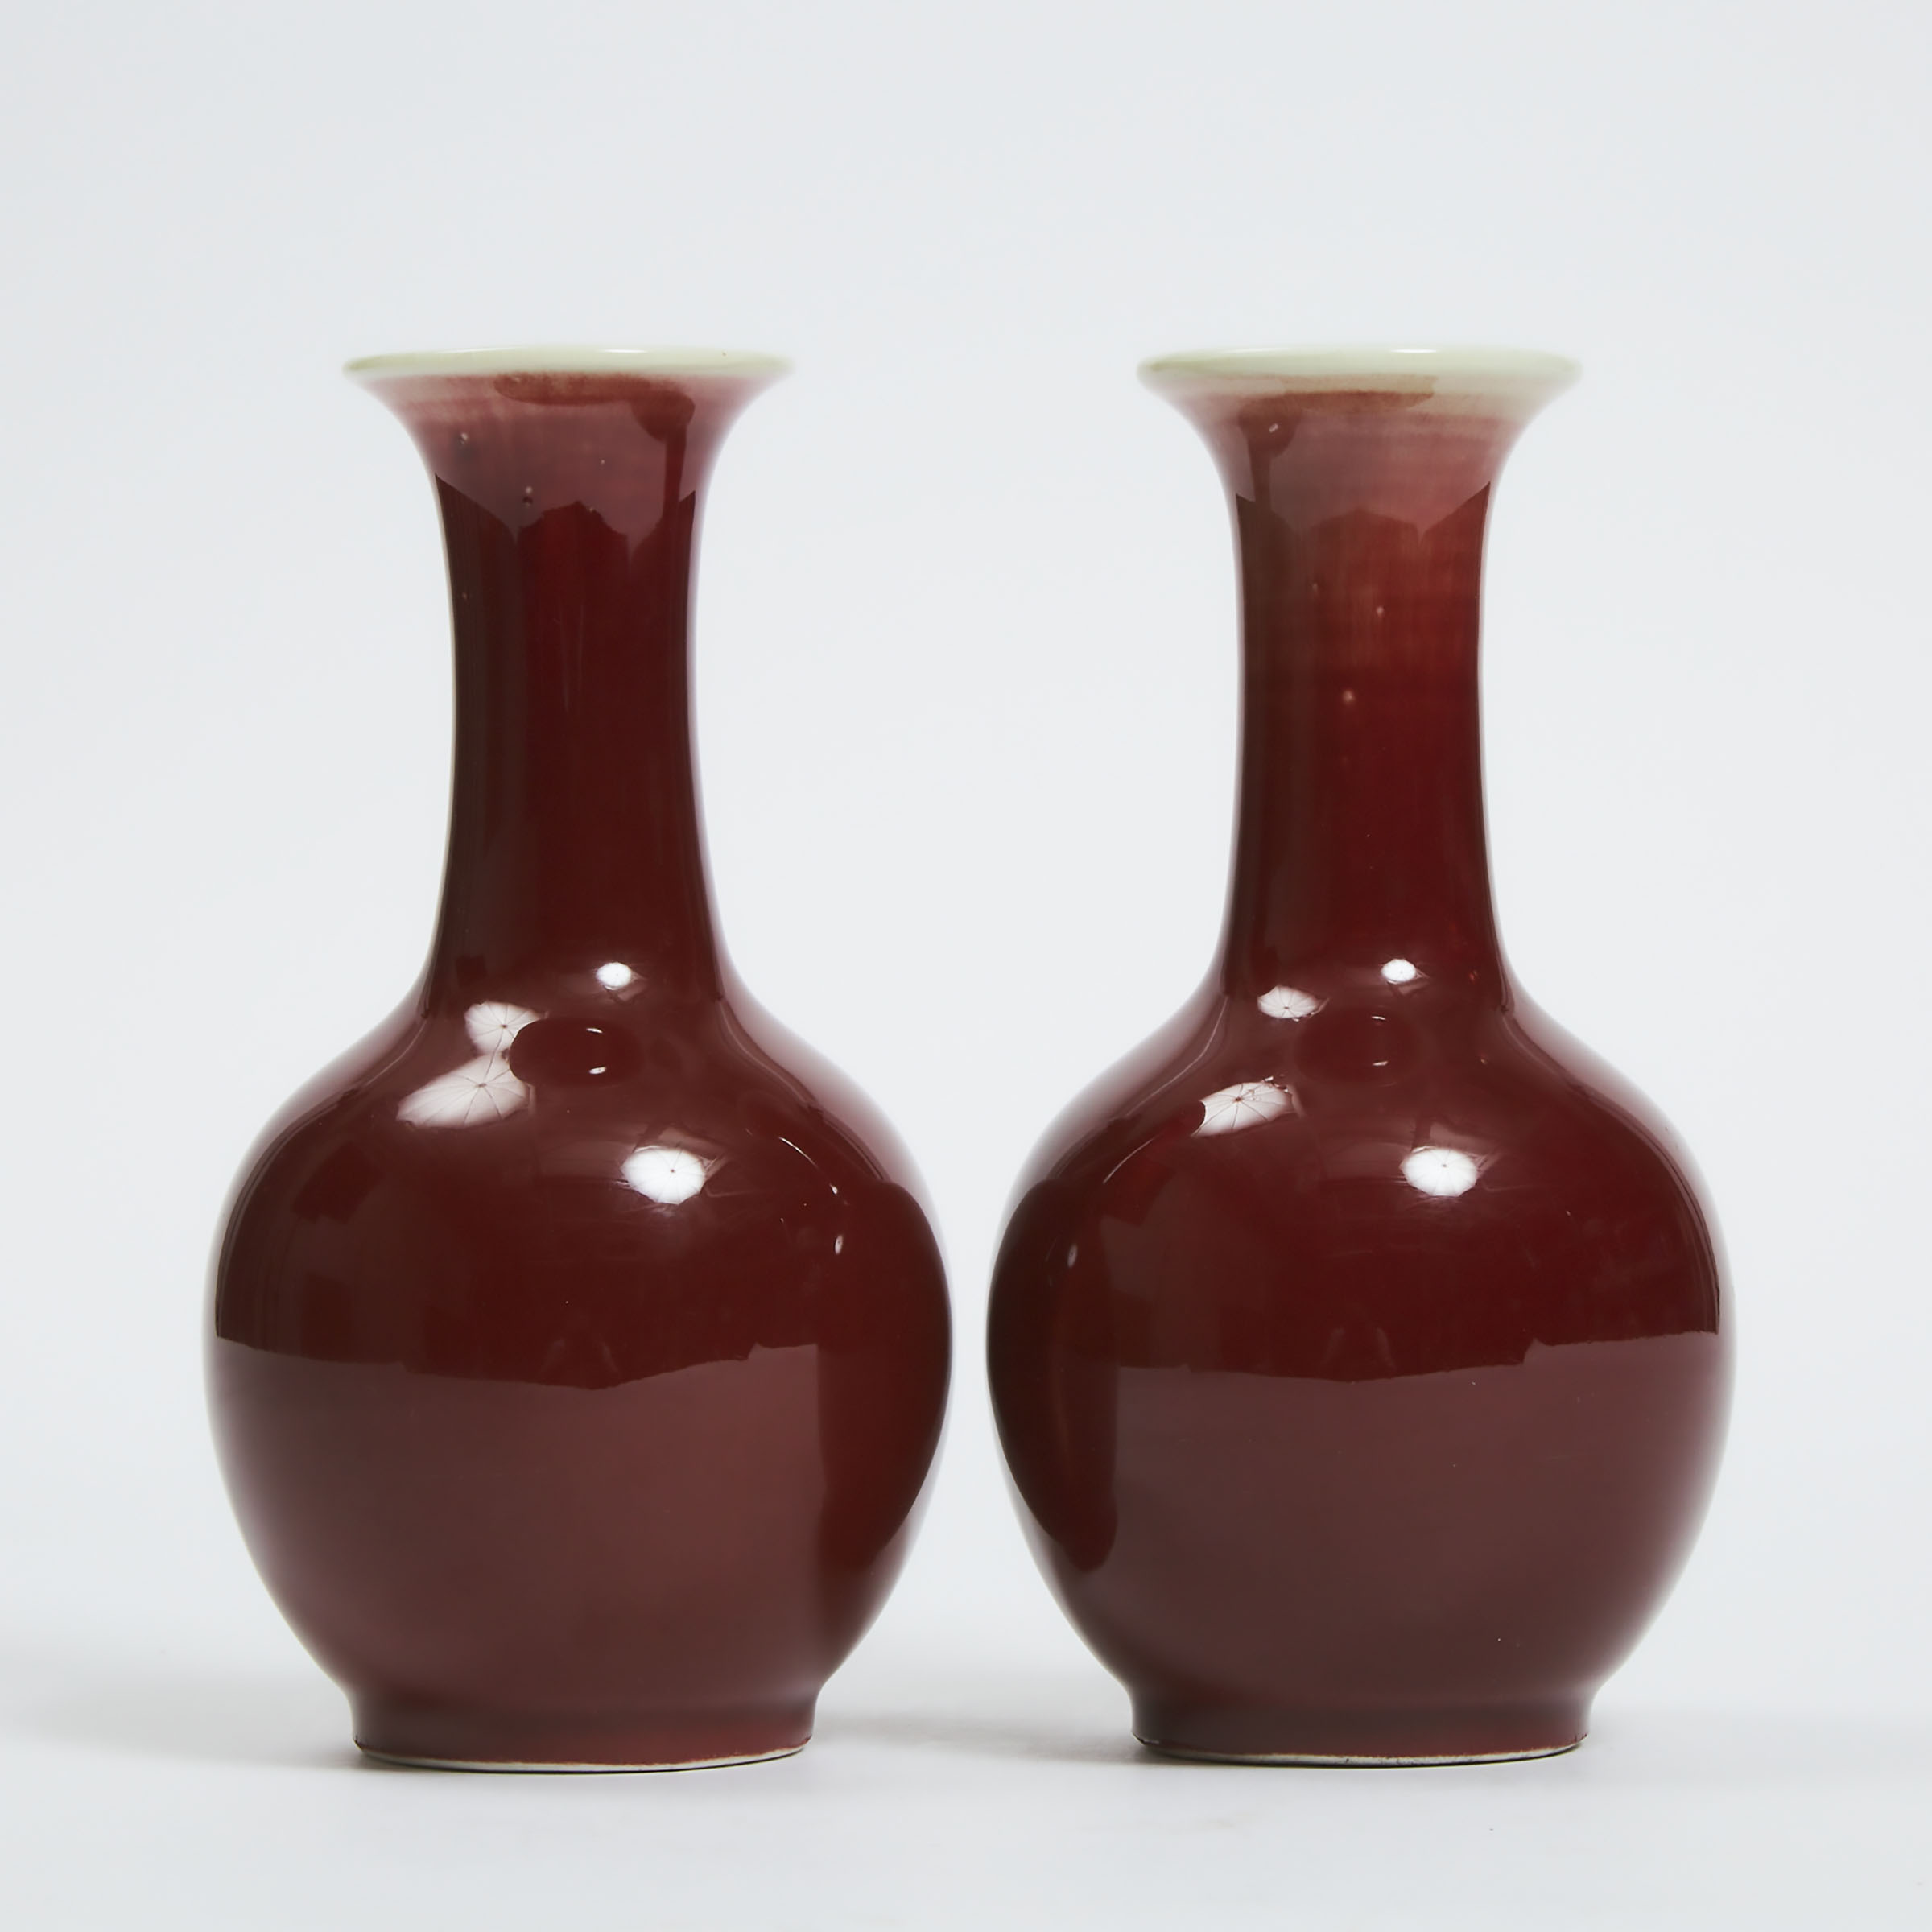 A Pair of Langyao Red Glazed Bottle Vases, Mid 20th Century